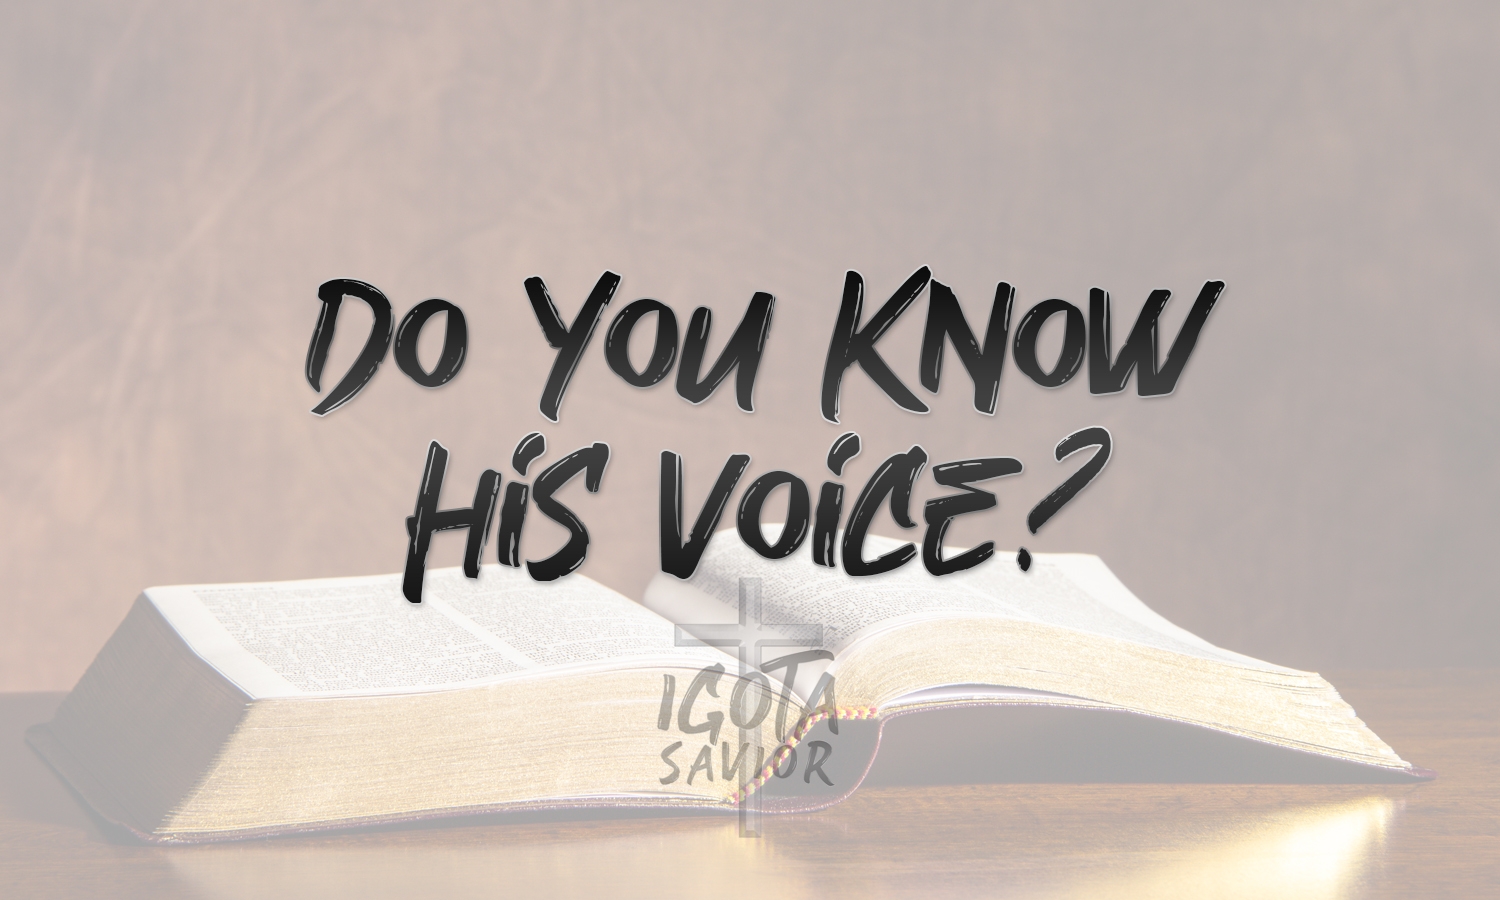 Do You Know His Voice?